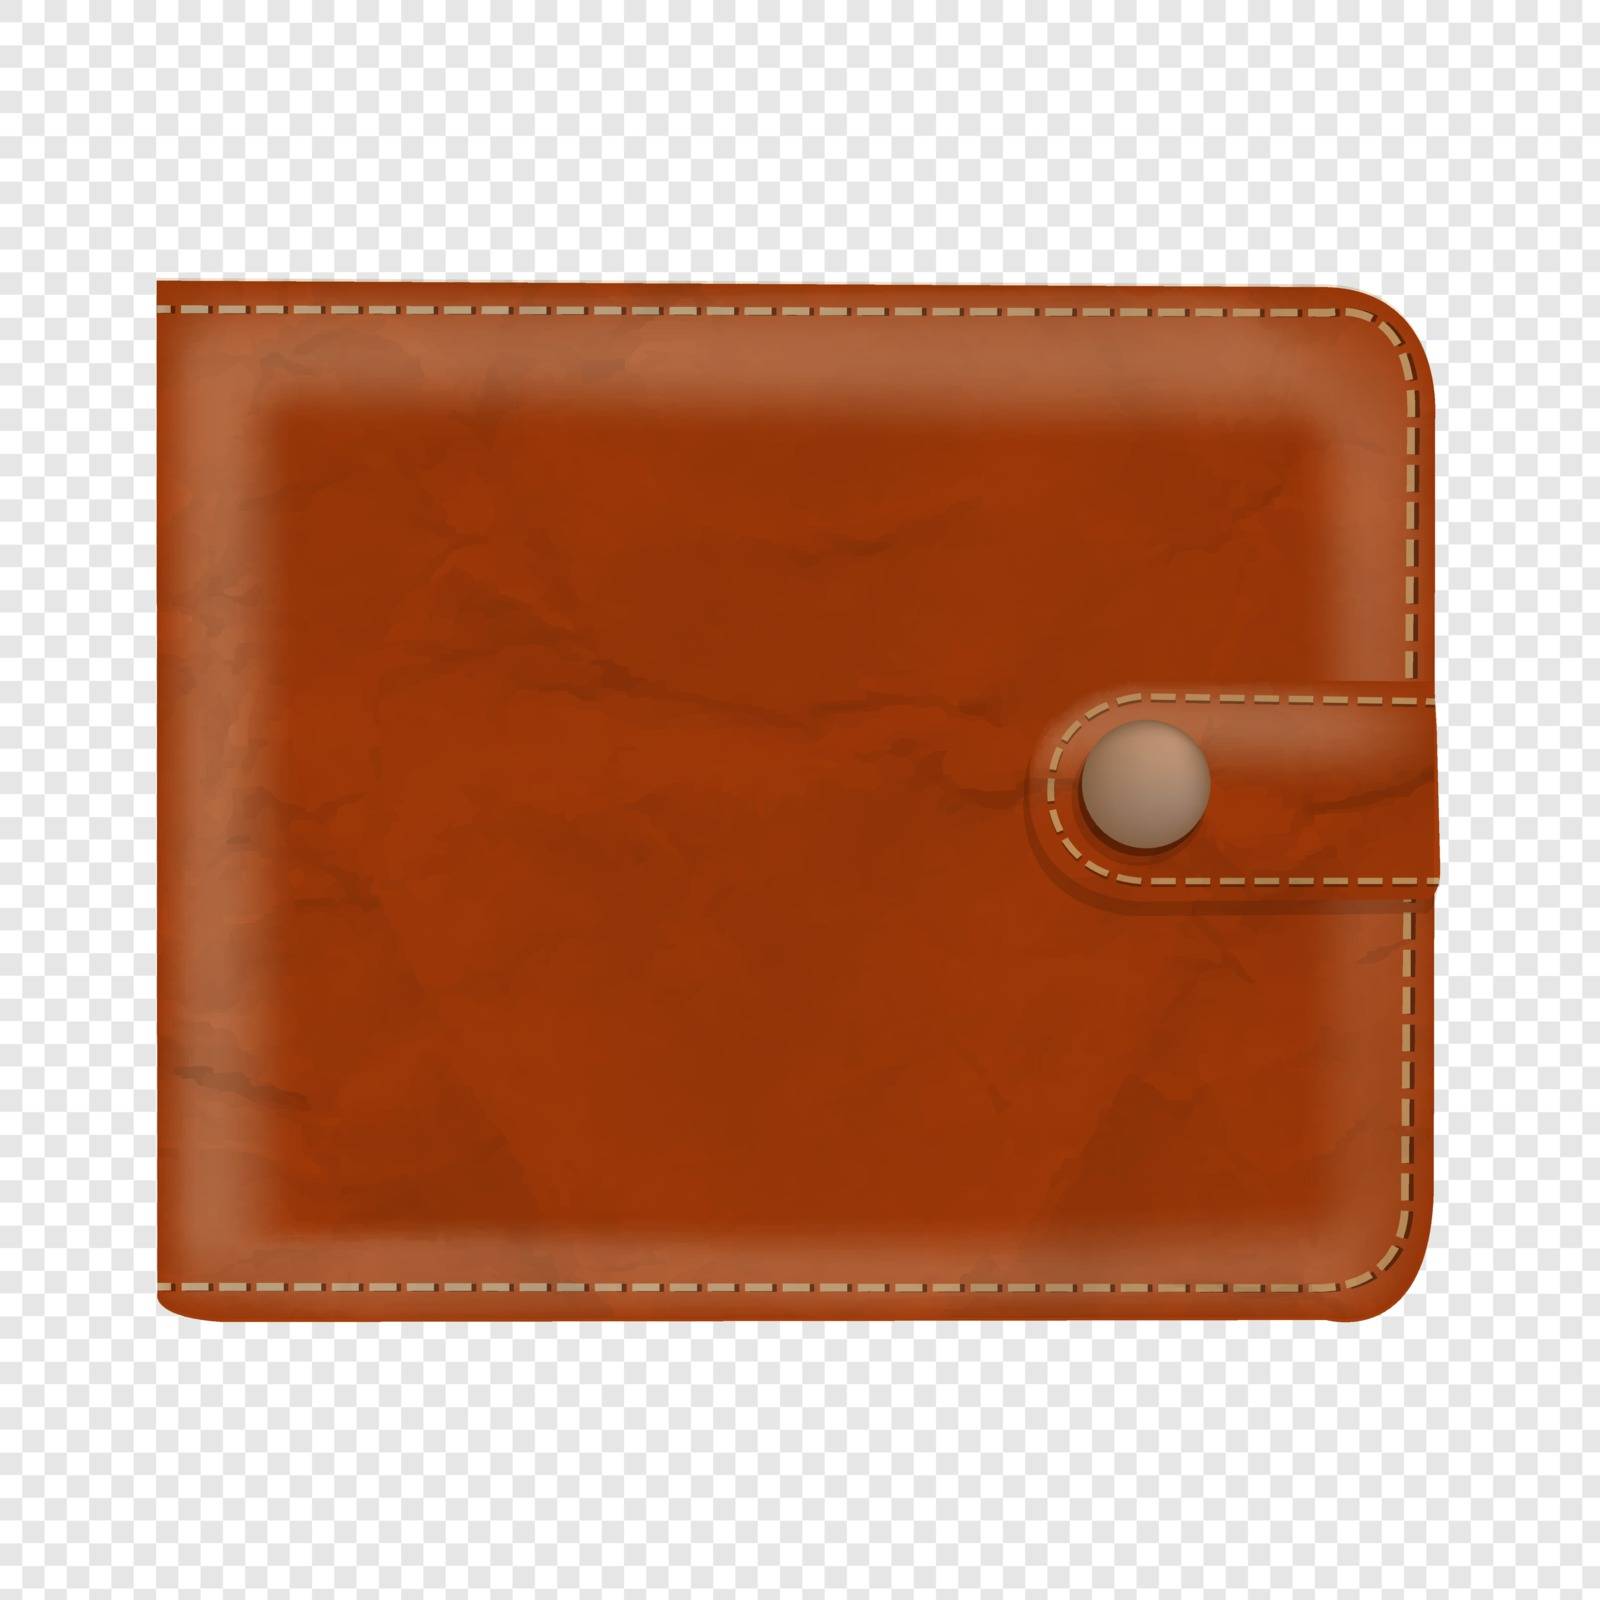 Wallet Isolated Transparent Background With Gradient Mesh, Vector Illustration
